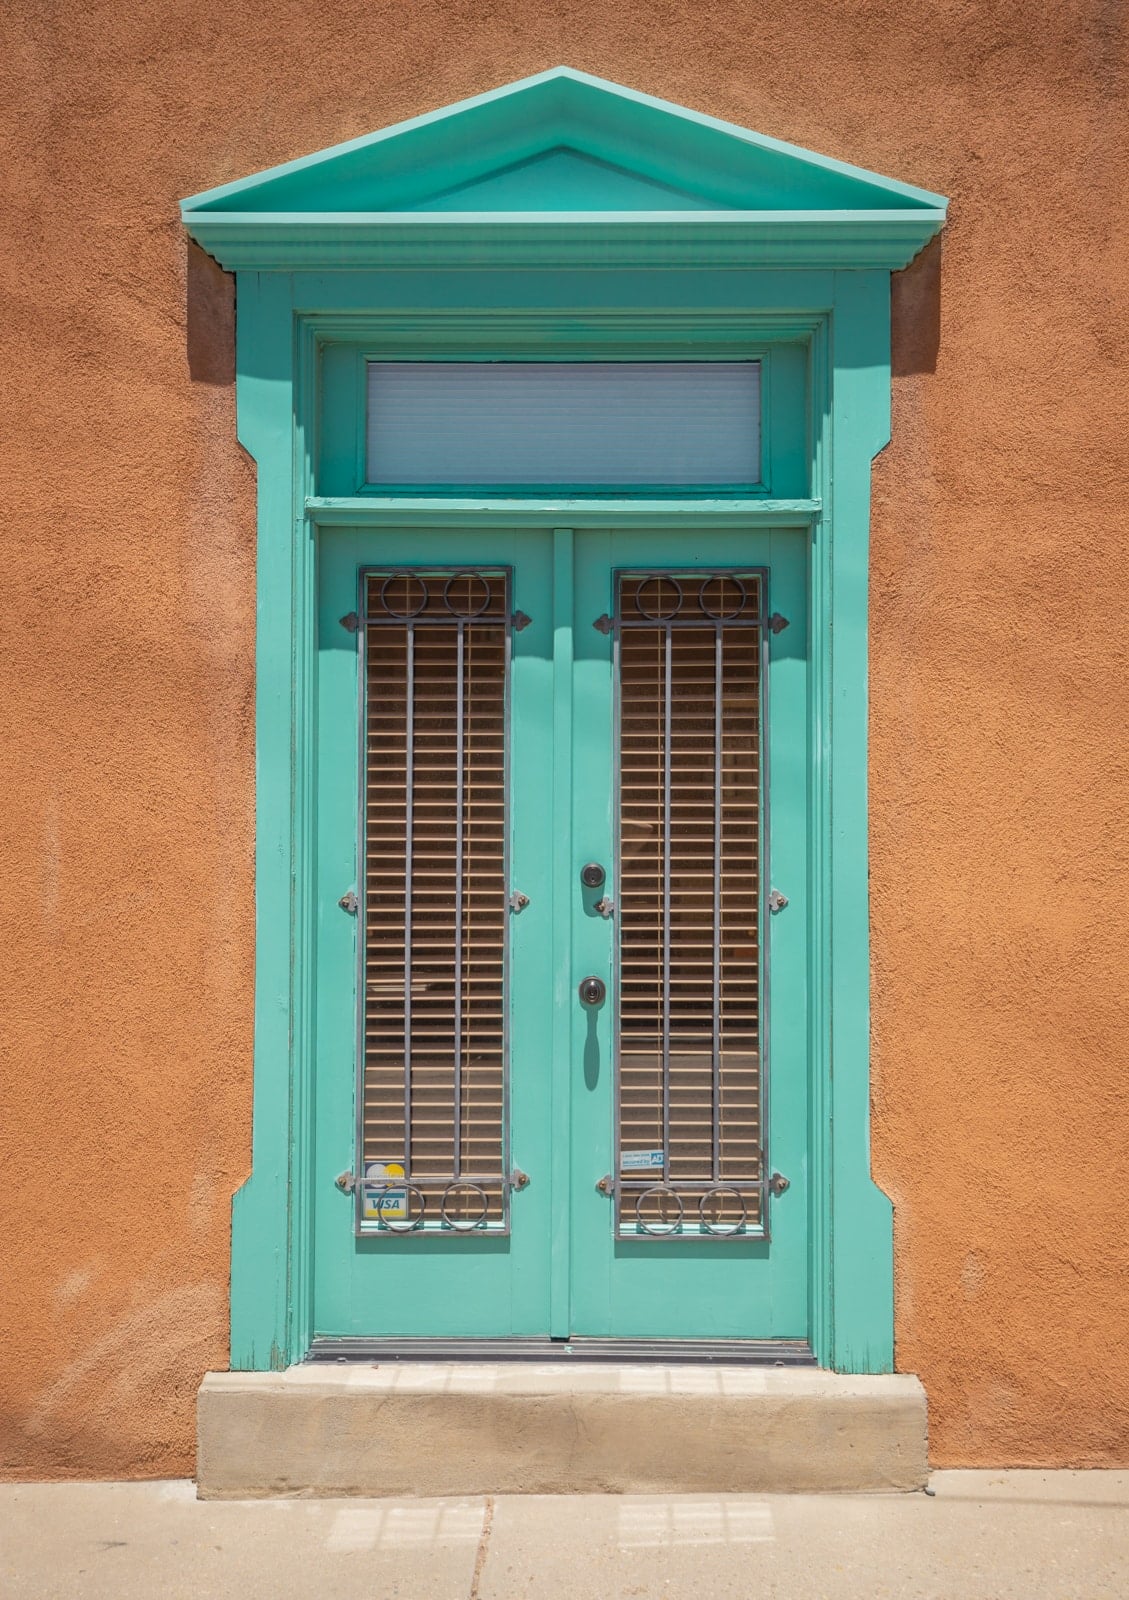 A turquoise window frame in an adobe style building